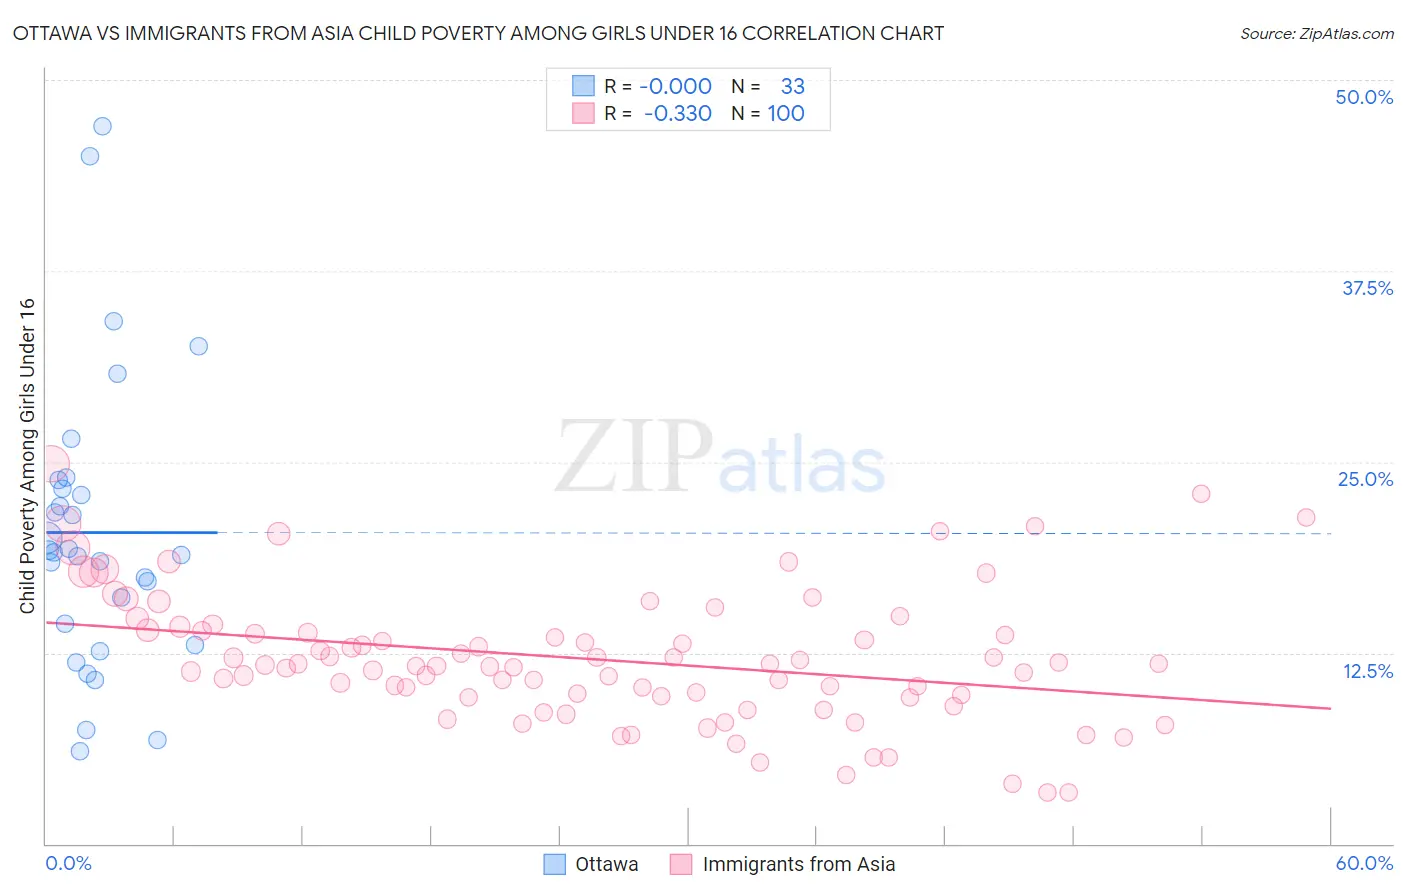 Ottawa vs Immigrants from Asia Child Poverty Among Girls Under 16